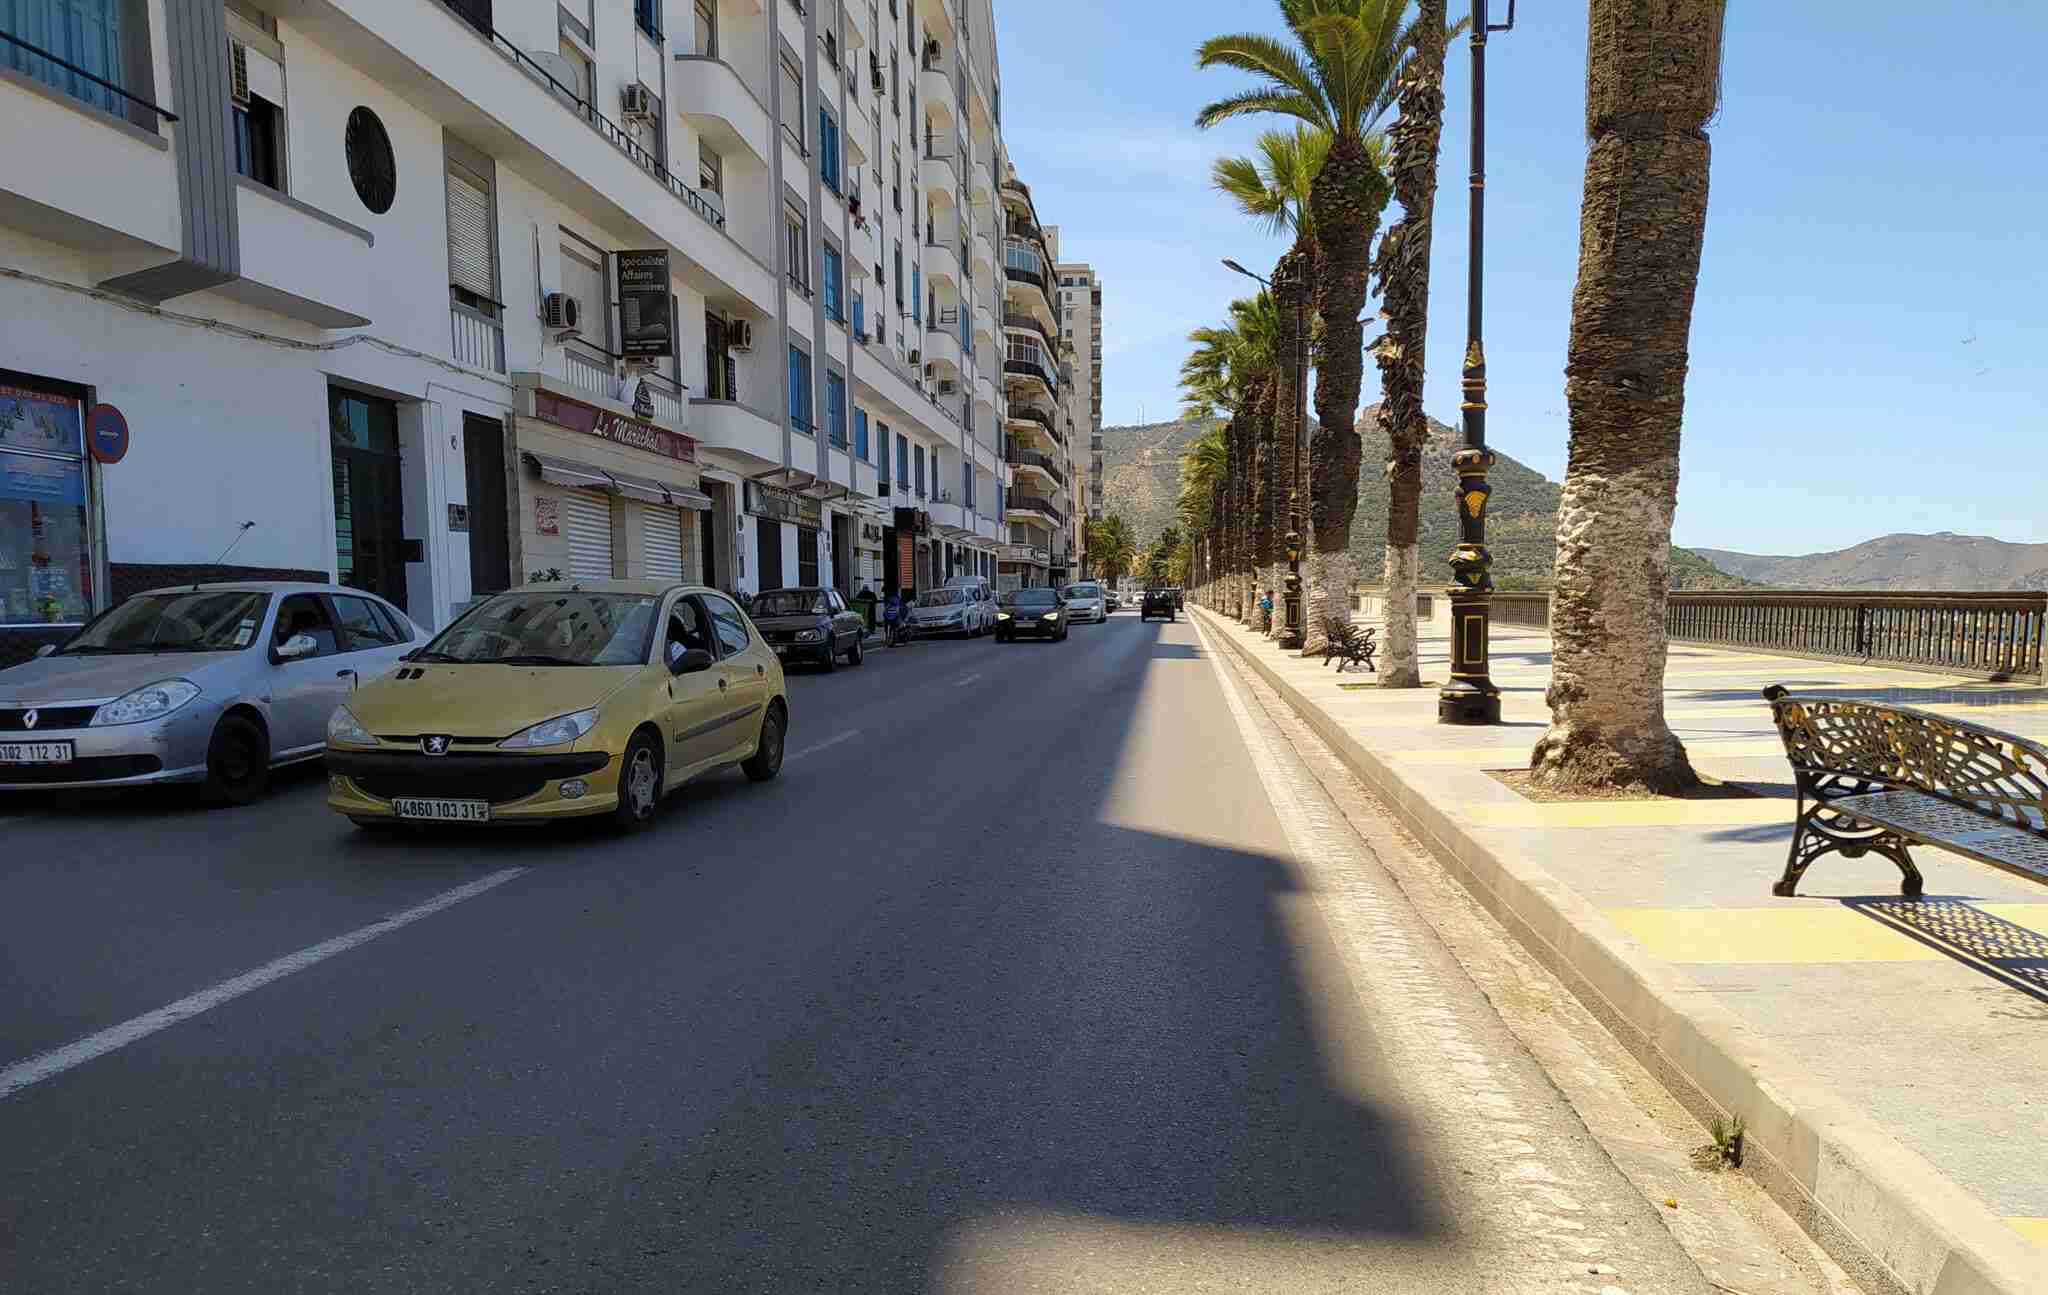 The streets of Oran are mostly deserted and devoid of any pedestrians on May 12, as city dwellers stay home to protect themselves from COVID-19. Farid Sait/Zenger)